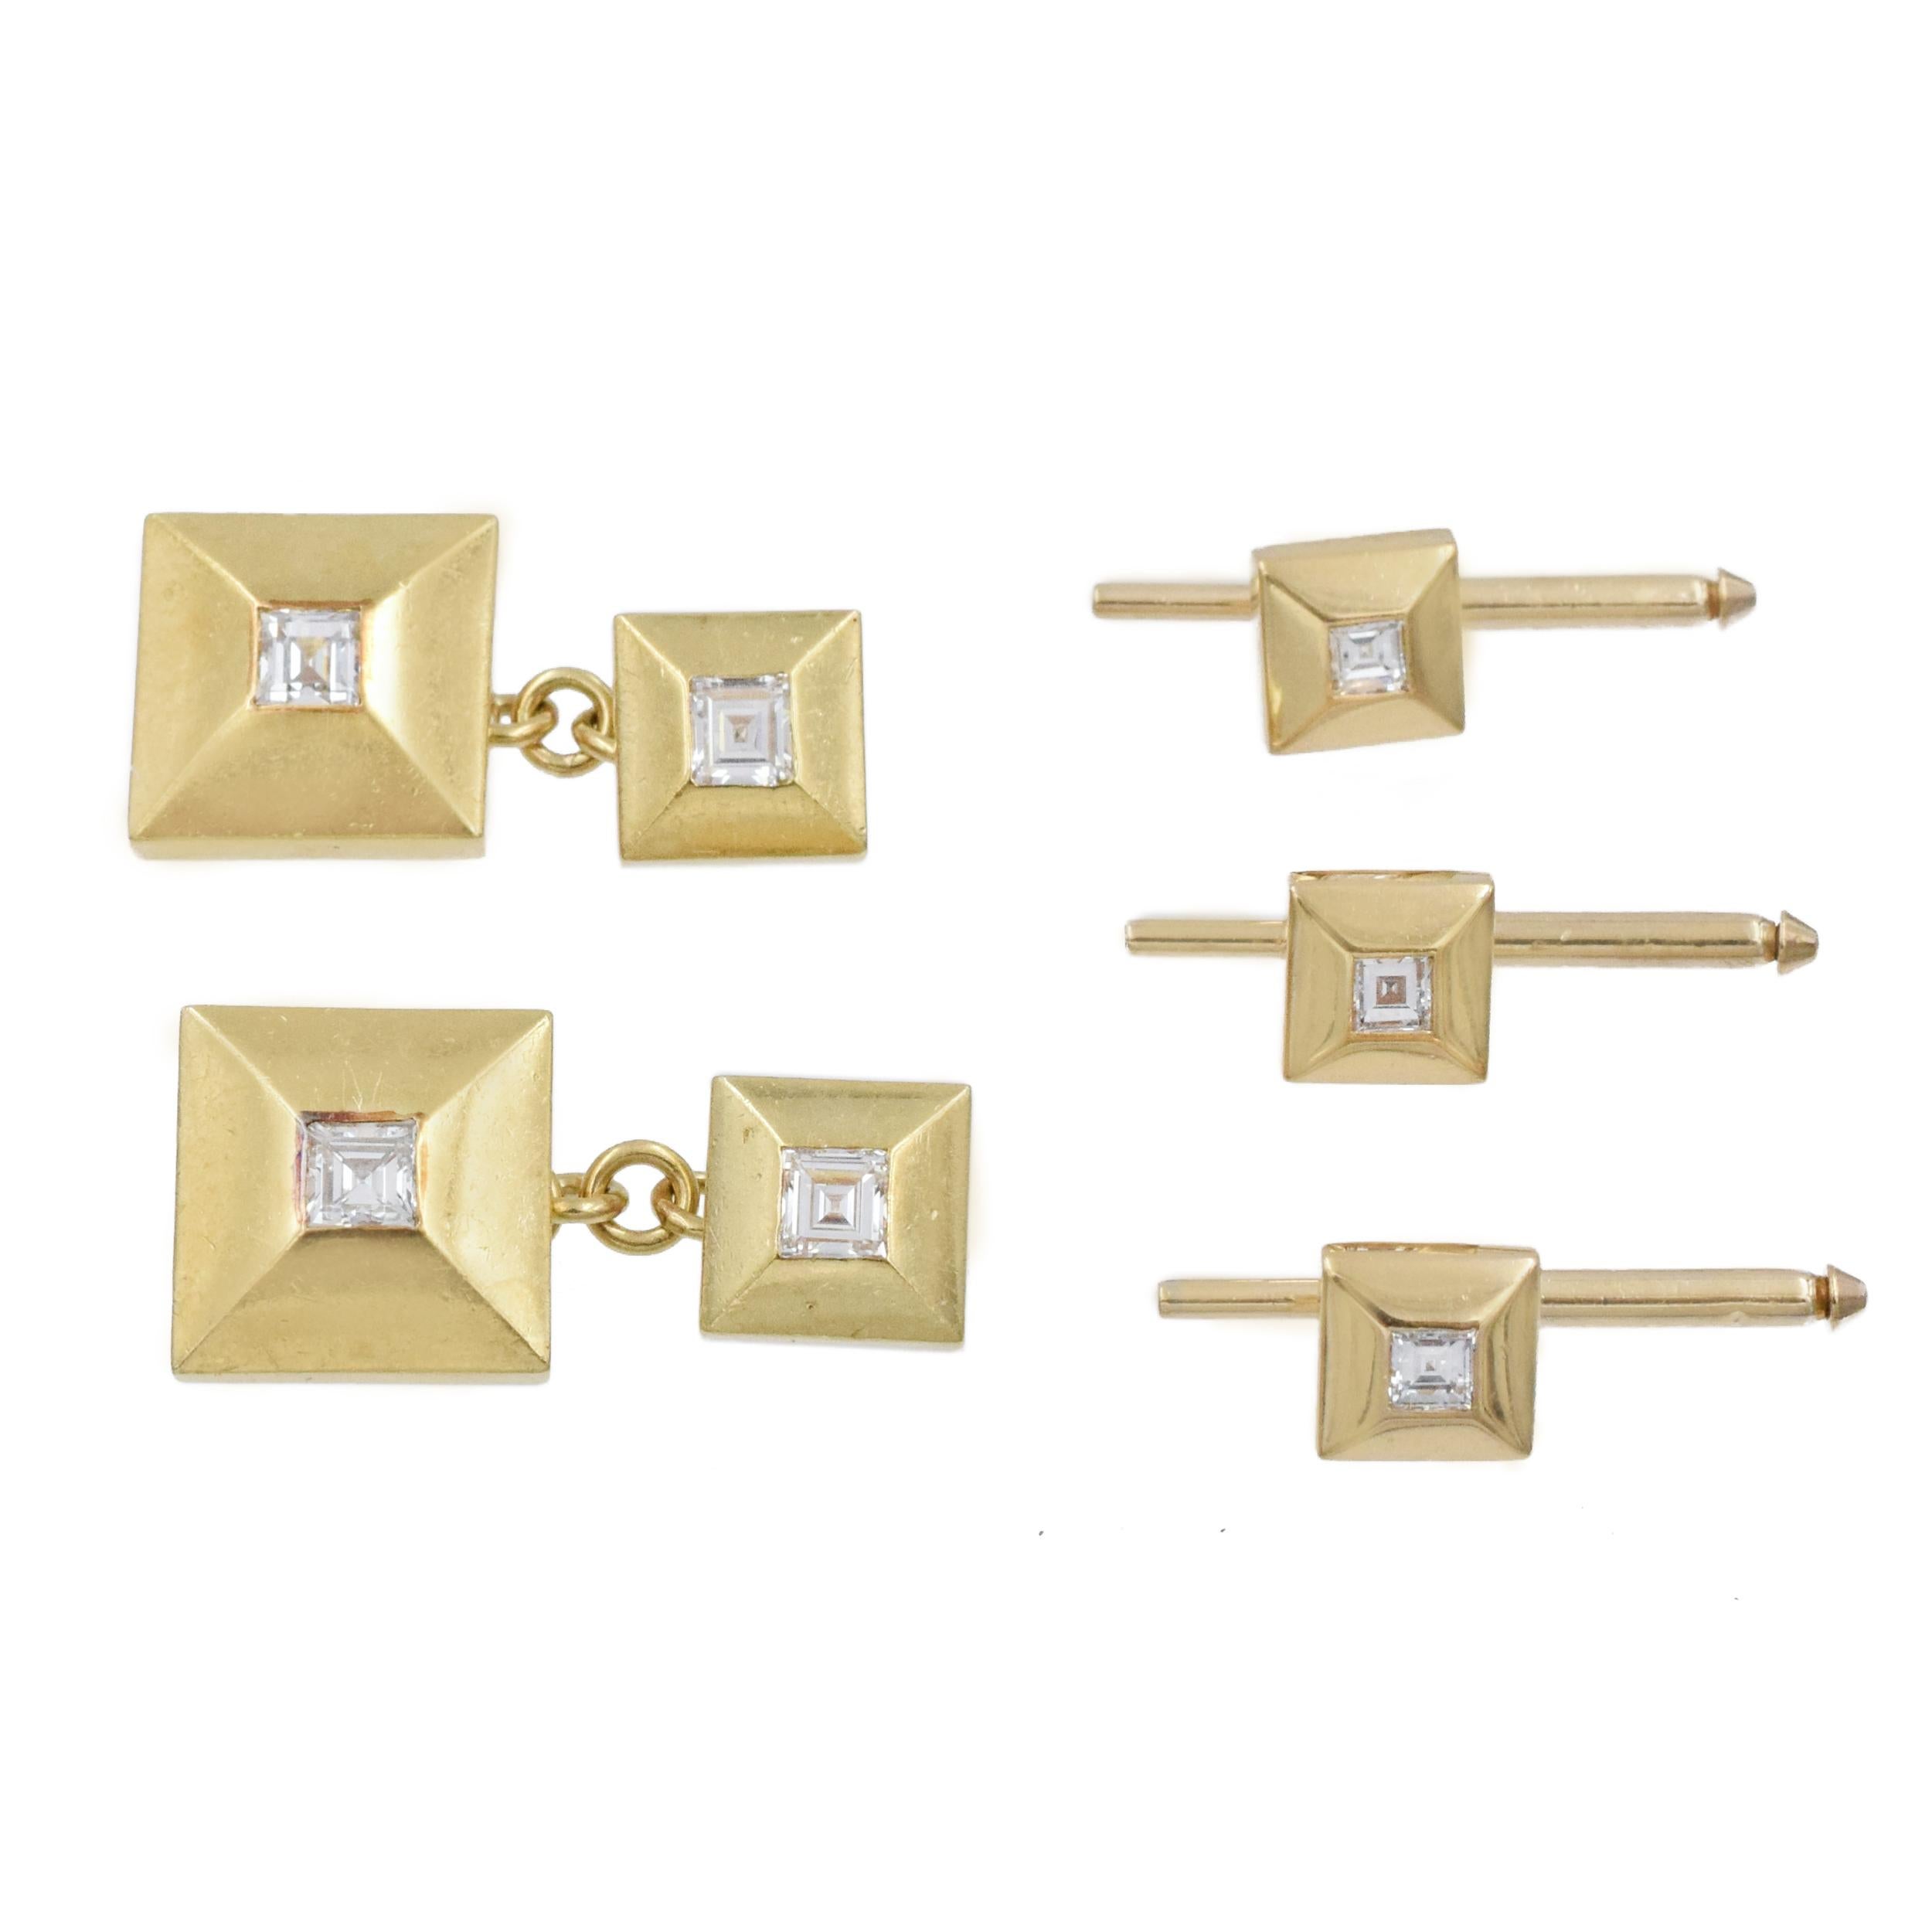 Cartier Diamond And Gold Tuxedo Suite. This Suite Has 2
Cufflinks And 3 Buttons, Each Has A Diamond Center. The 7 Square Cut Diamonds Have A
Total Carat Weight Of Approximately 2.5ct. Signed Cartier And Stamped 18k. Cartier Number 31991 On The